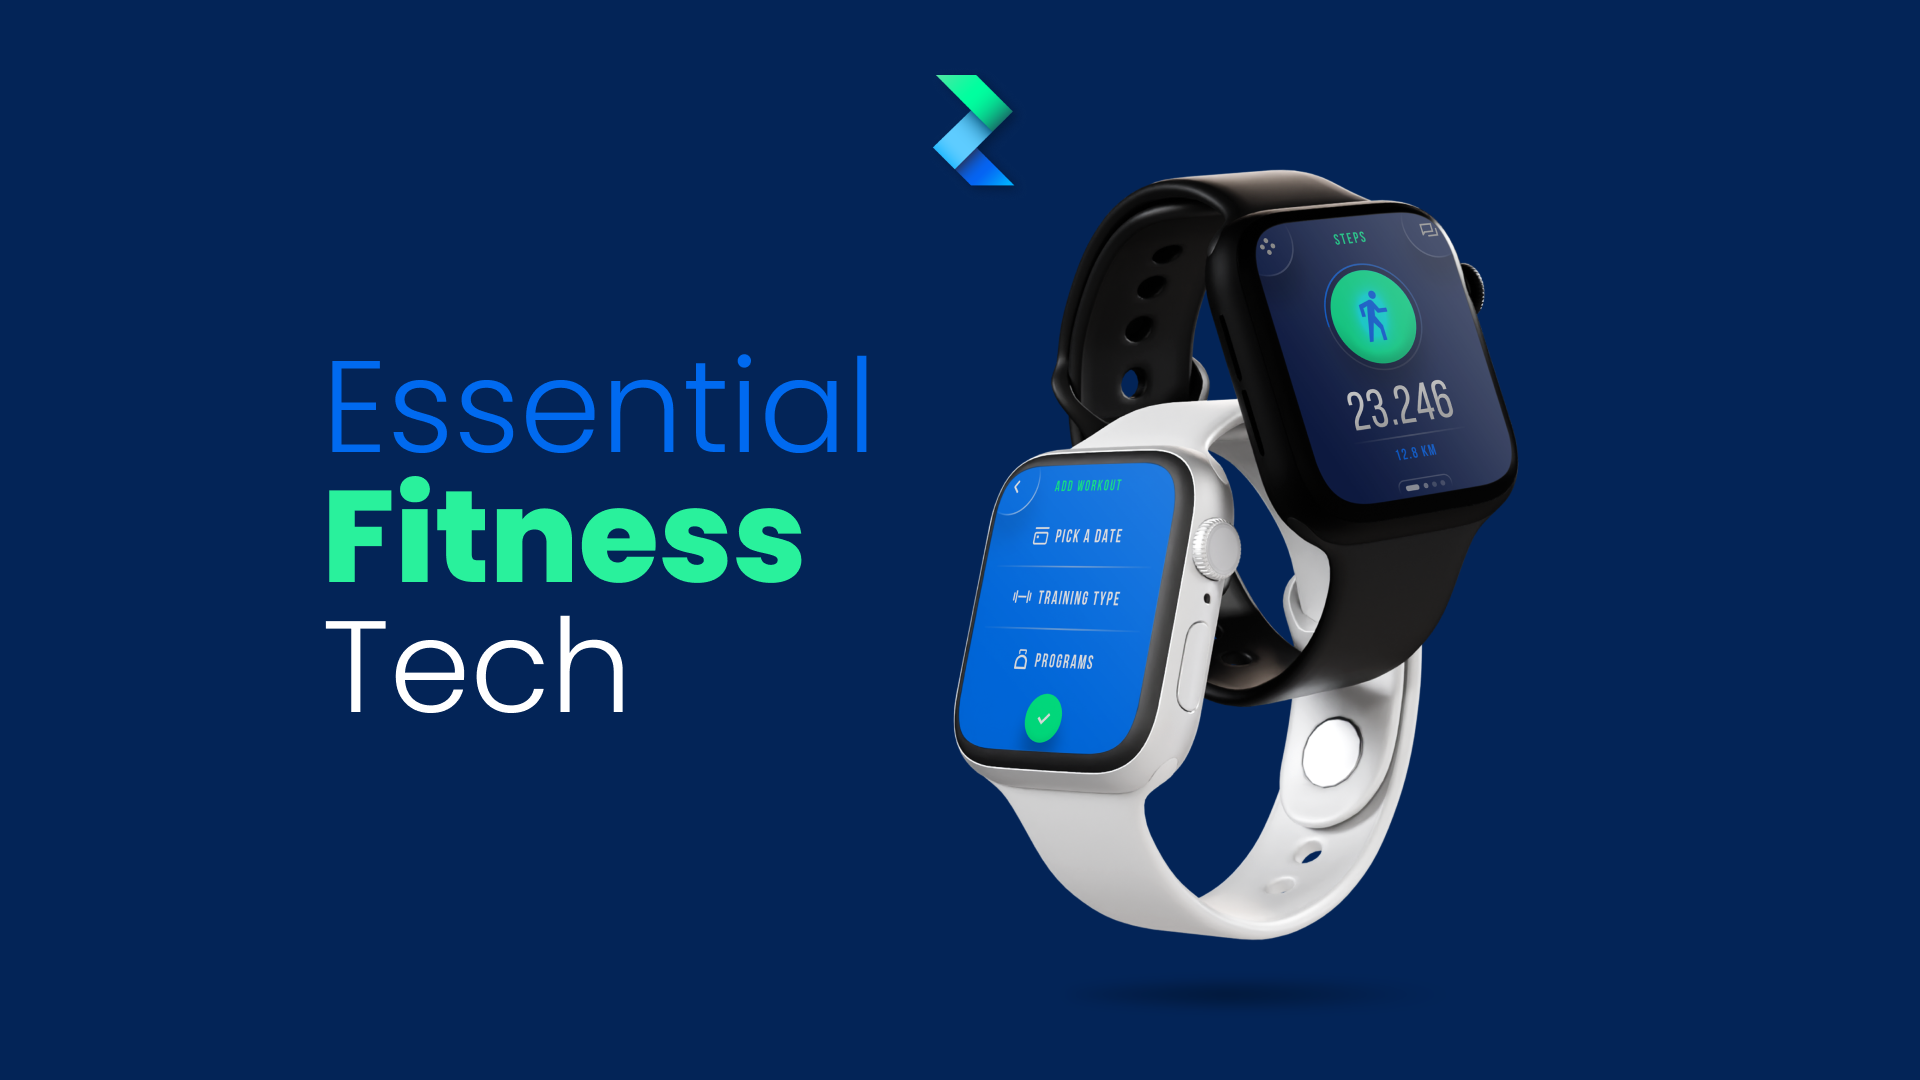 Must-have Tech for your Fitness Goals